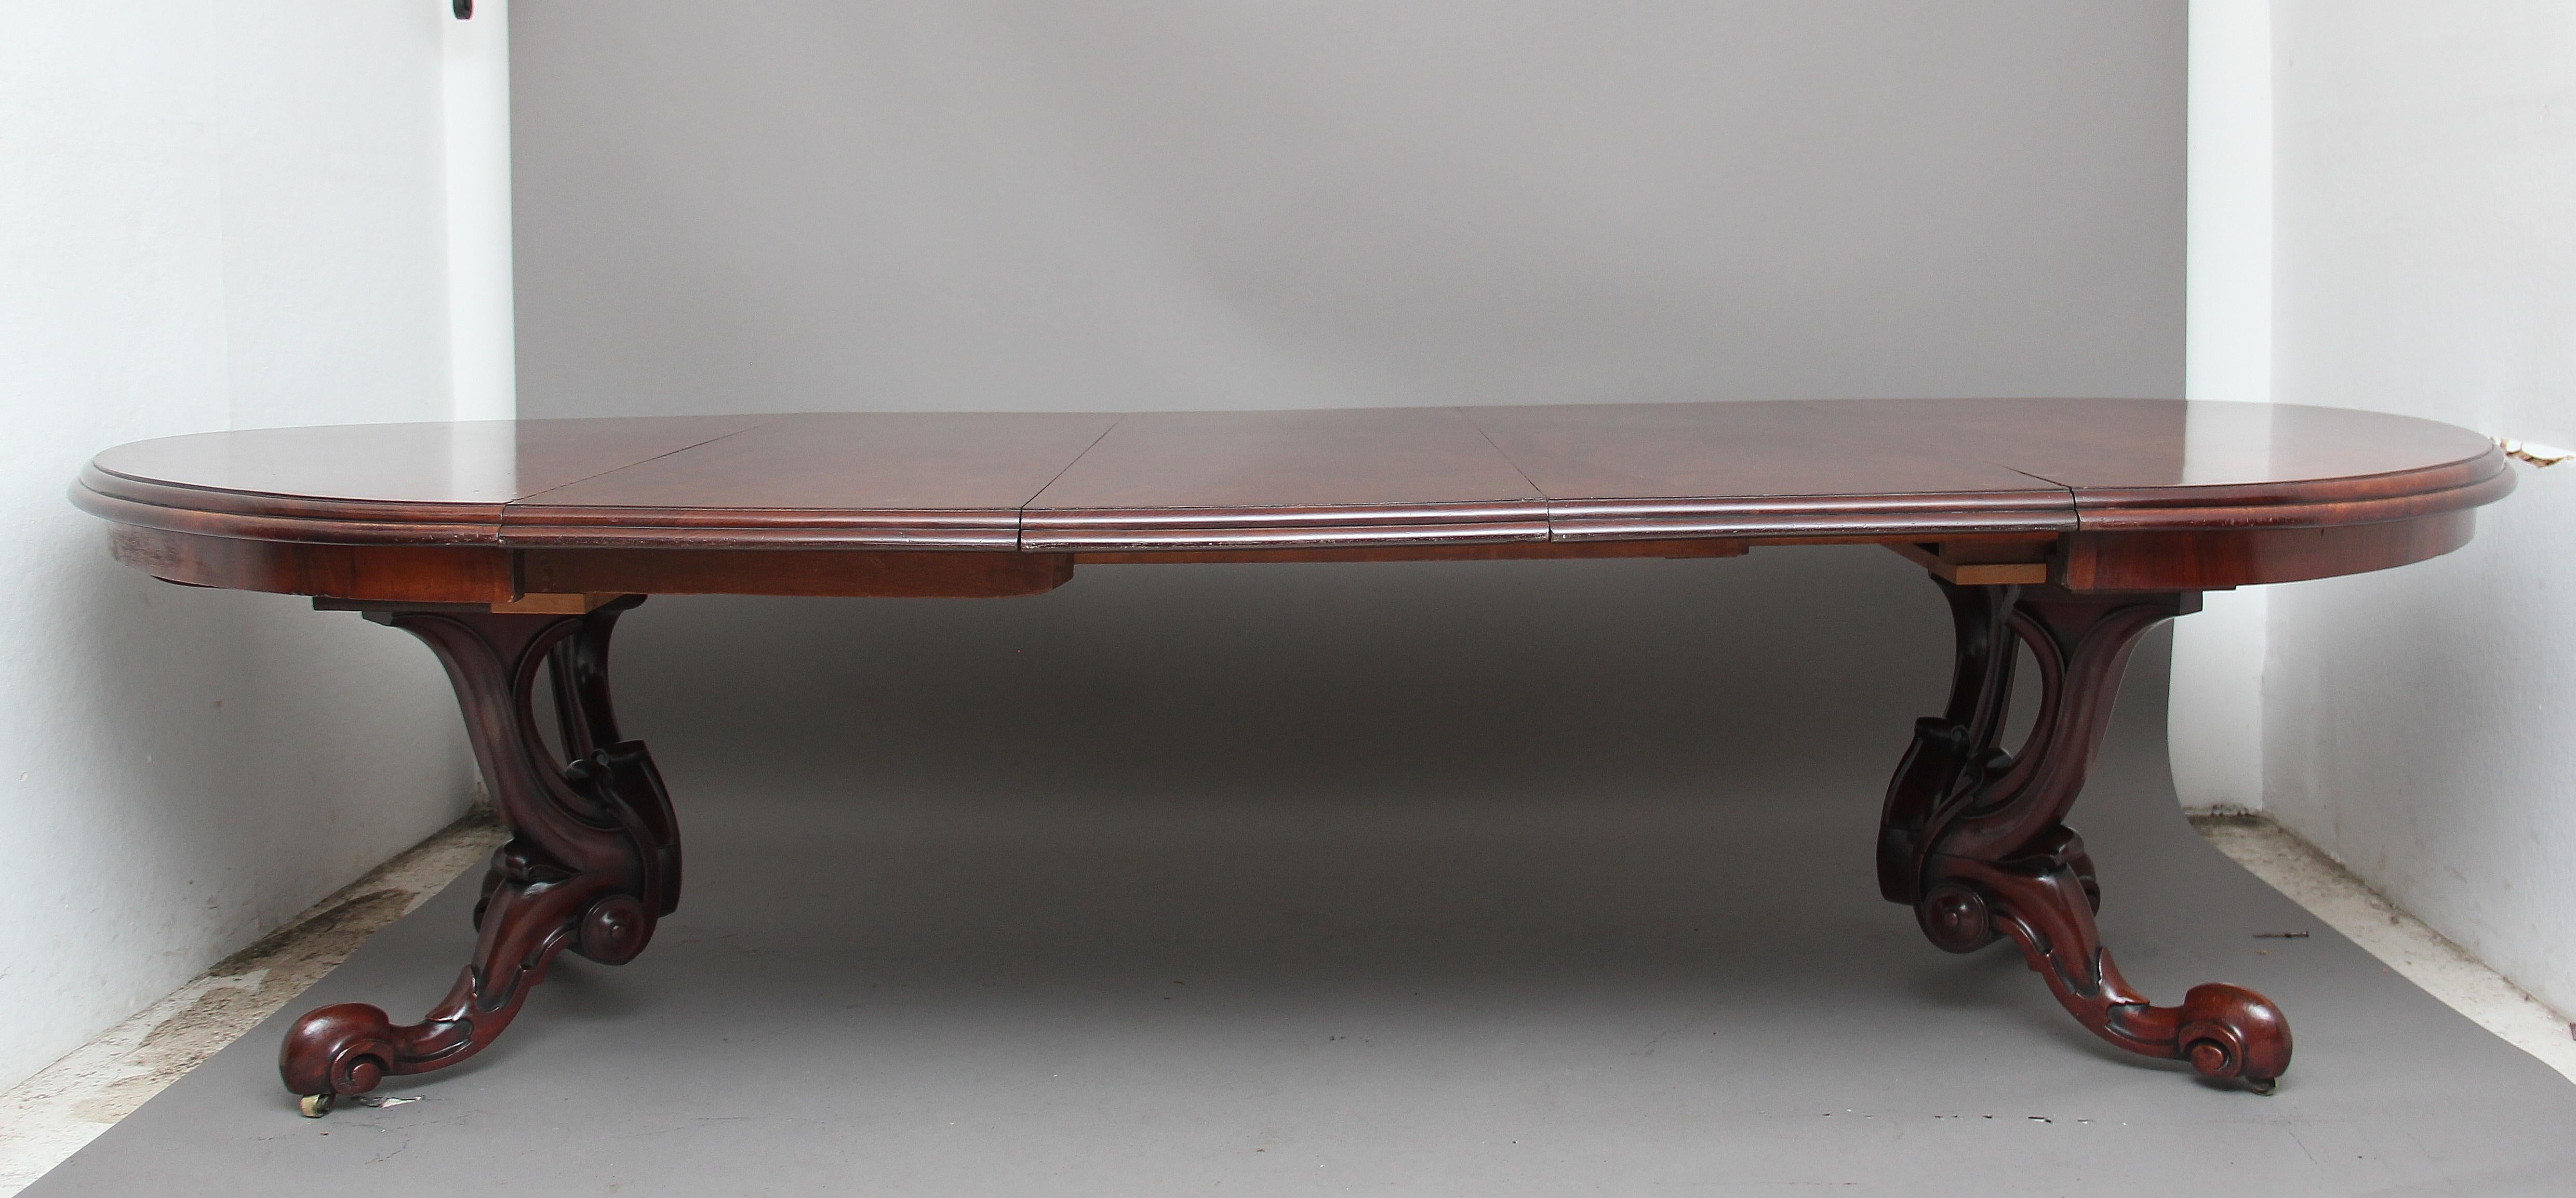 Mid-19th century mahogany dining table with three leaves, staring at 54” diameter (137cms diameter) extending to 111” (282cms) having a lovely figured top with nice moulded edge supported on an unusual carved and swept base. Fantastic colour and in